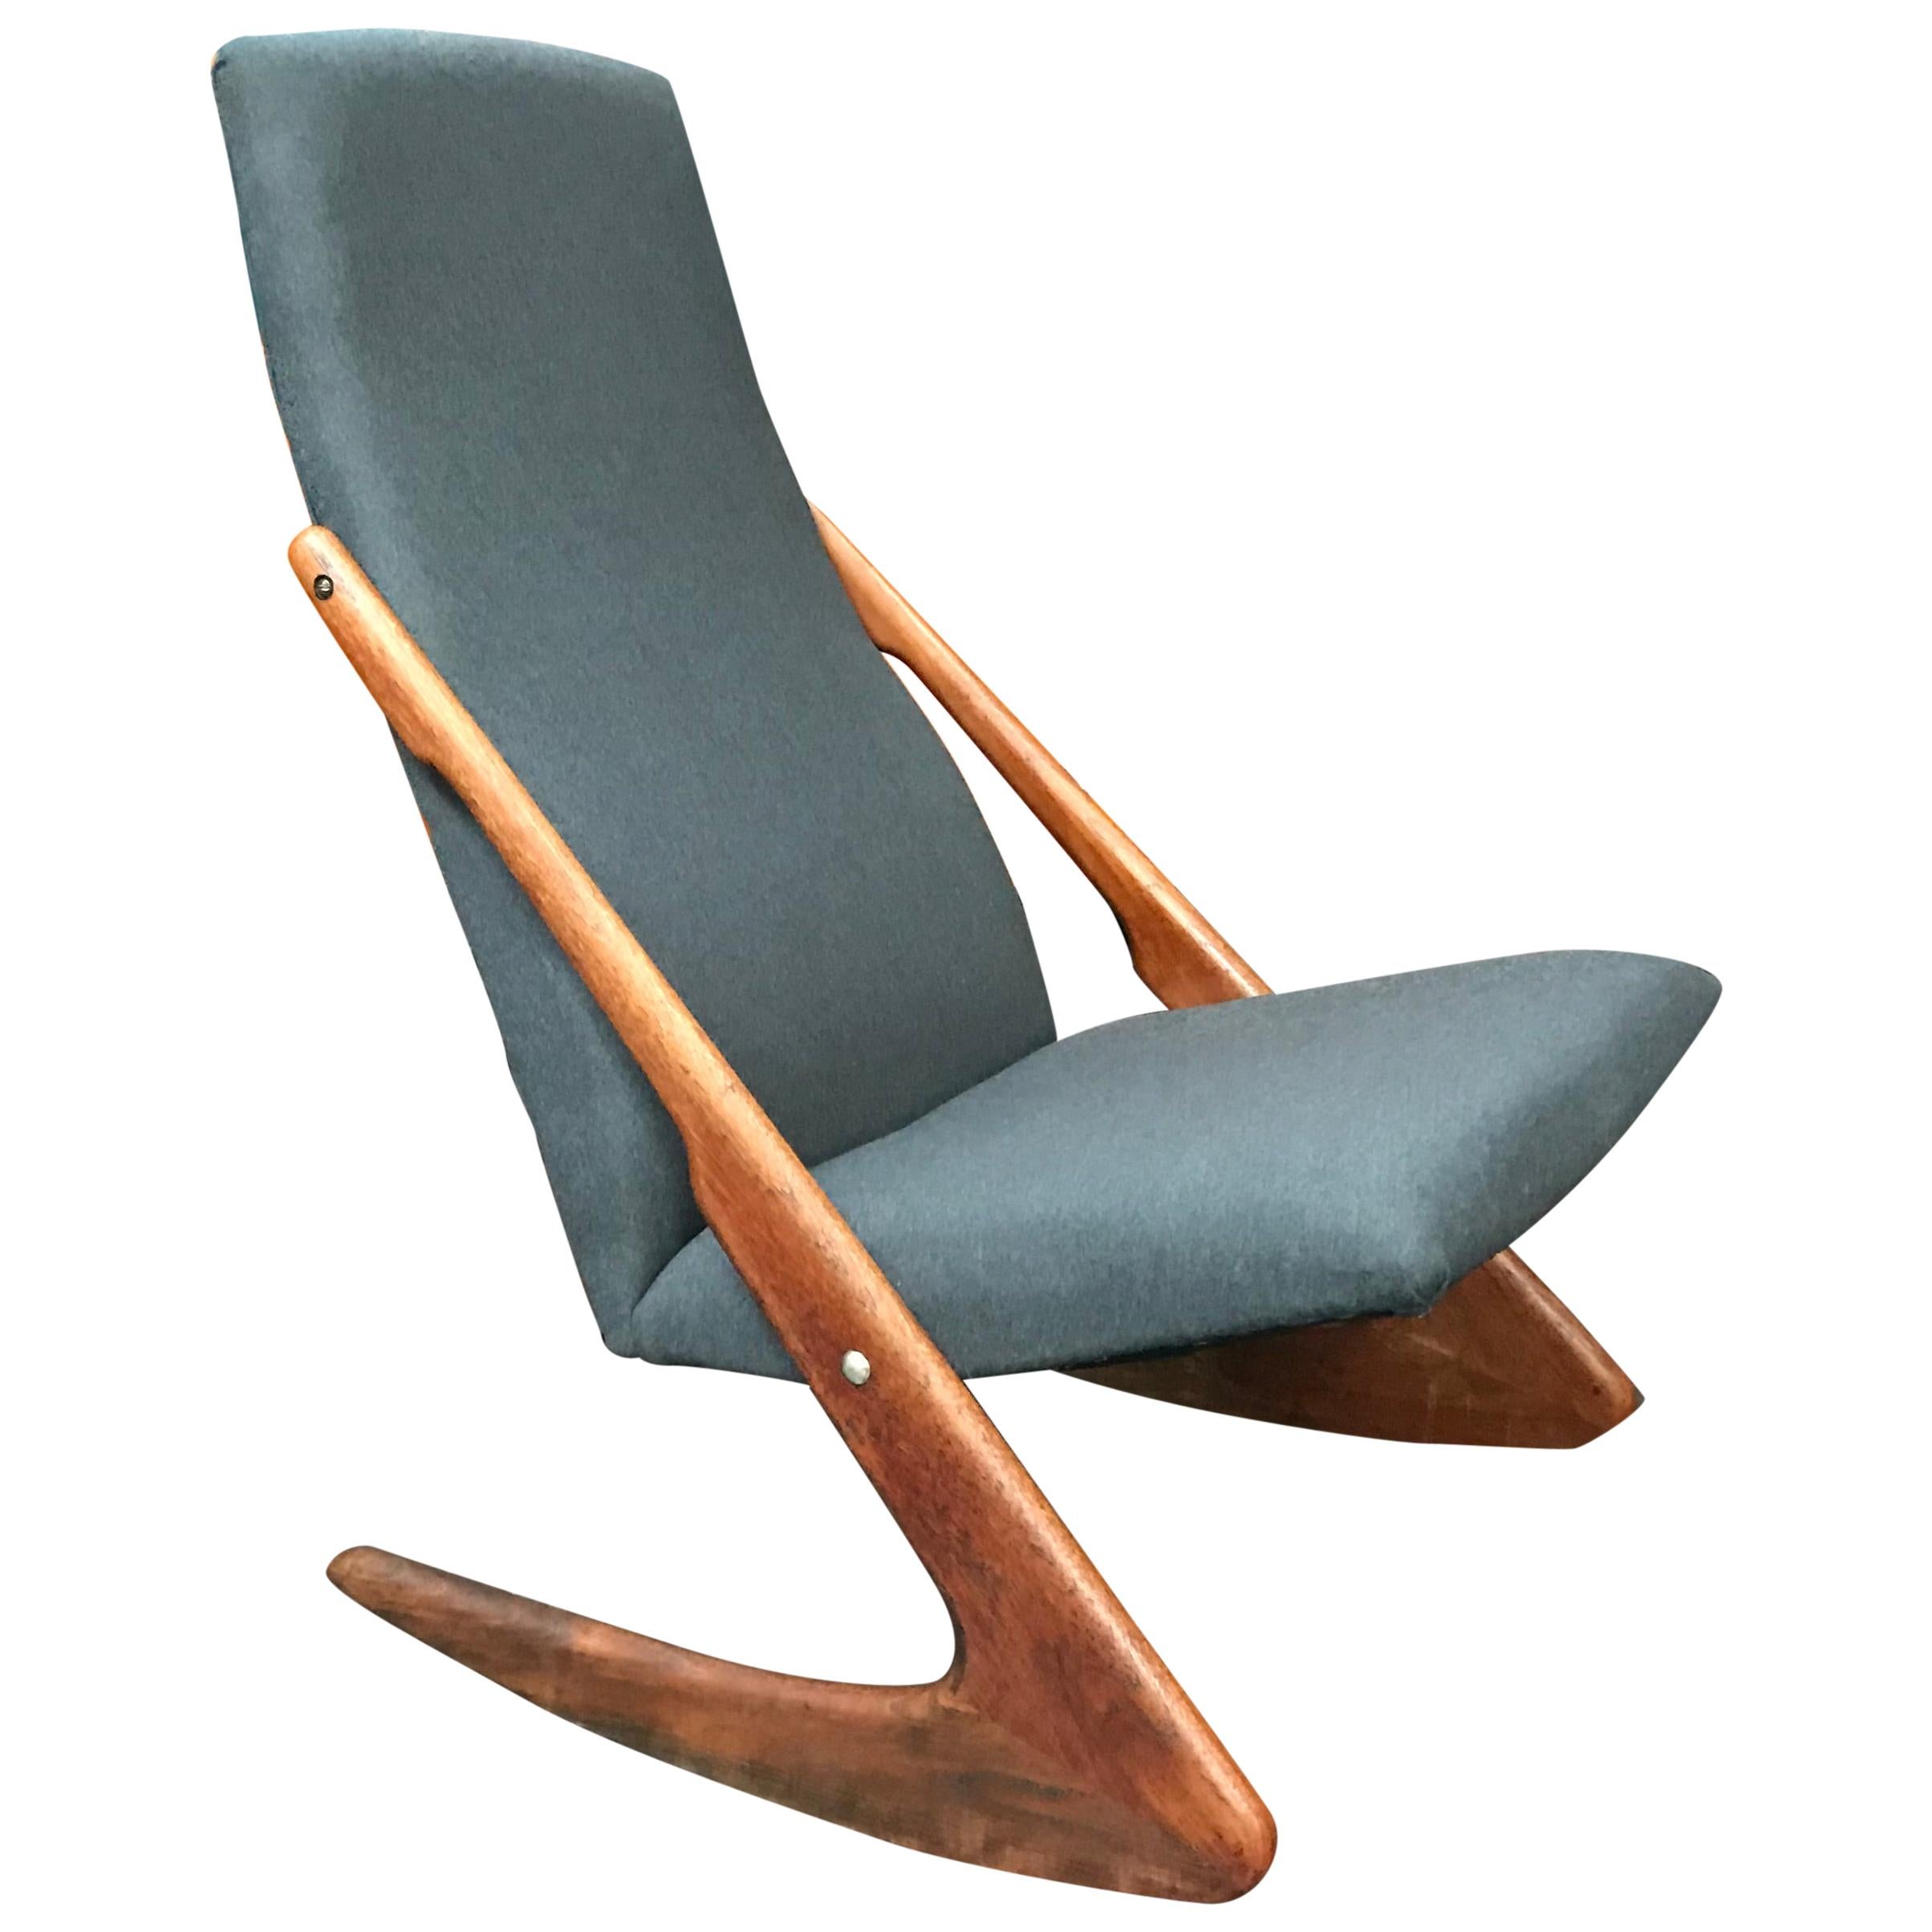 Danish Midcentury 'Boomerang' Rocking Chair by Mogens Kold For Sale